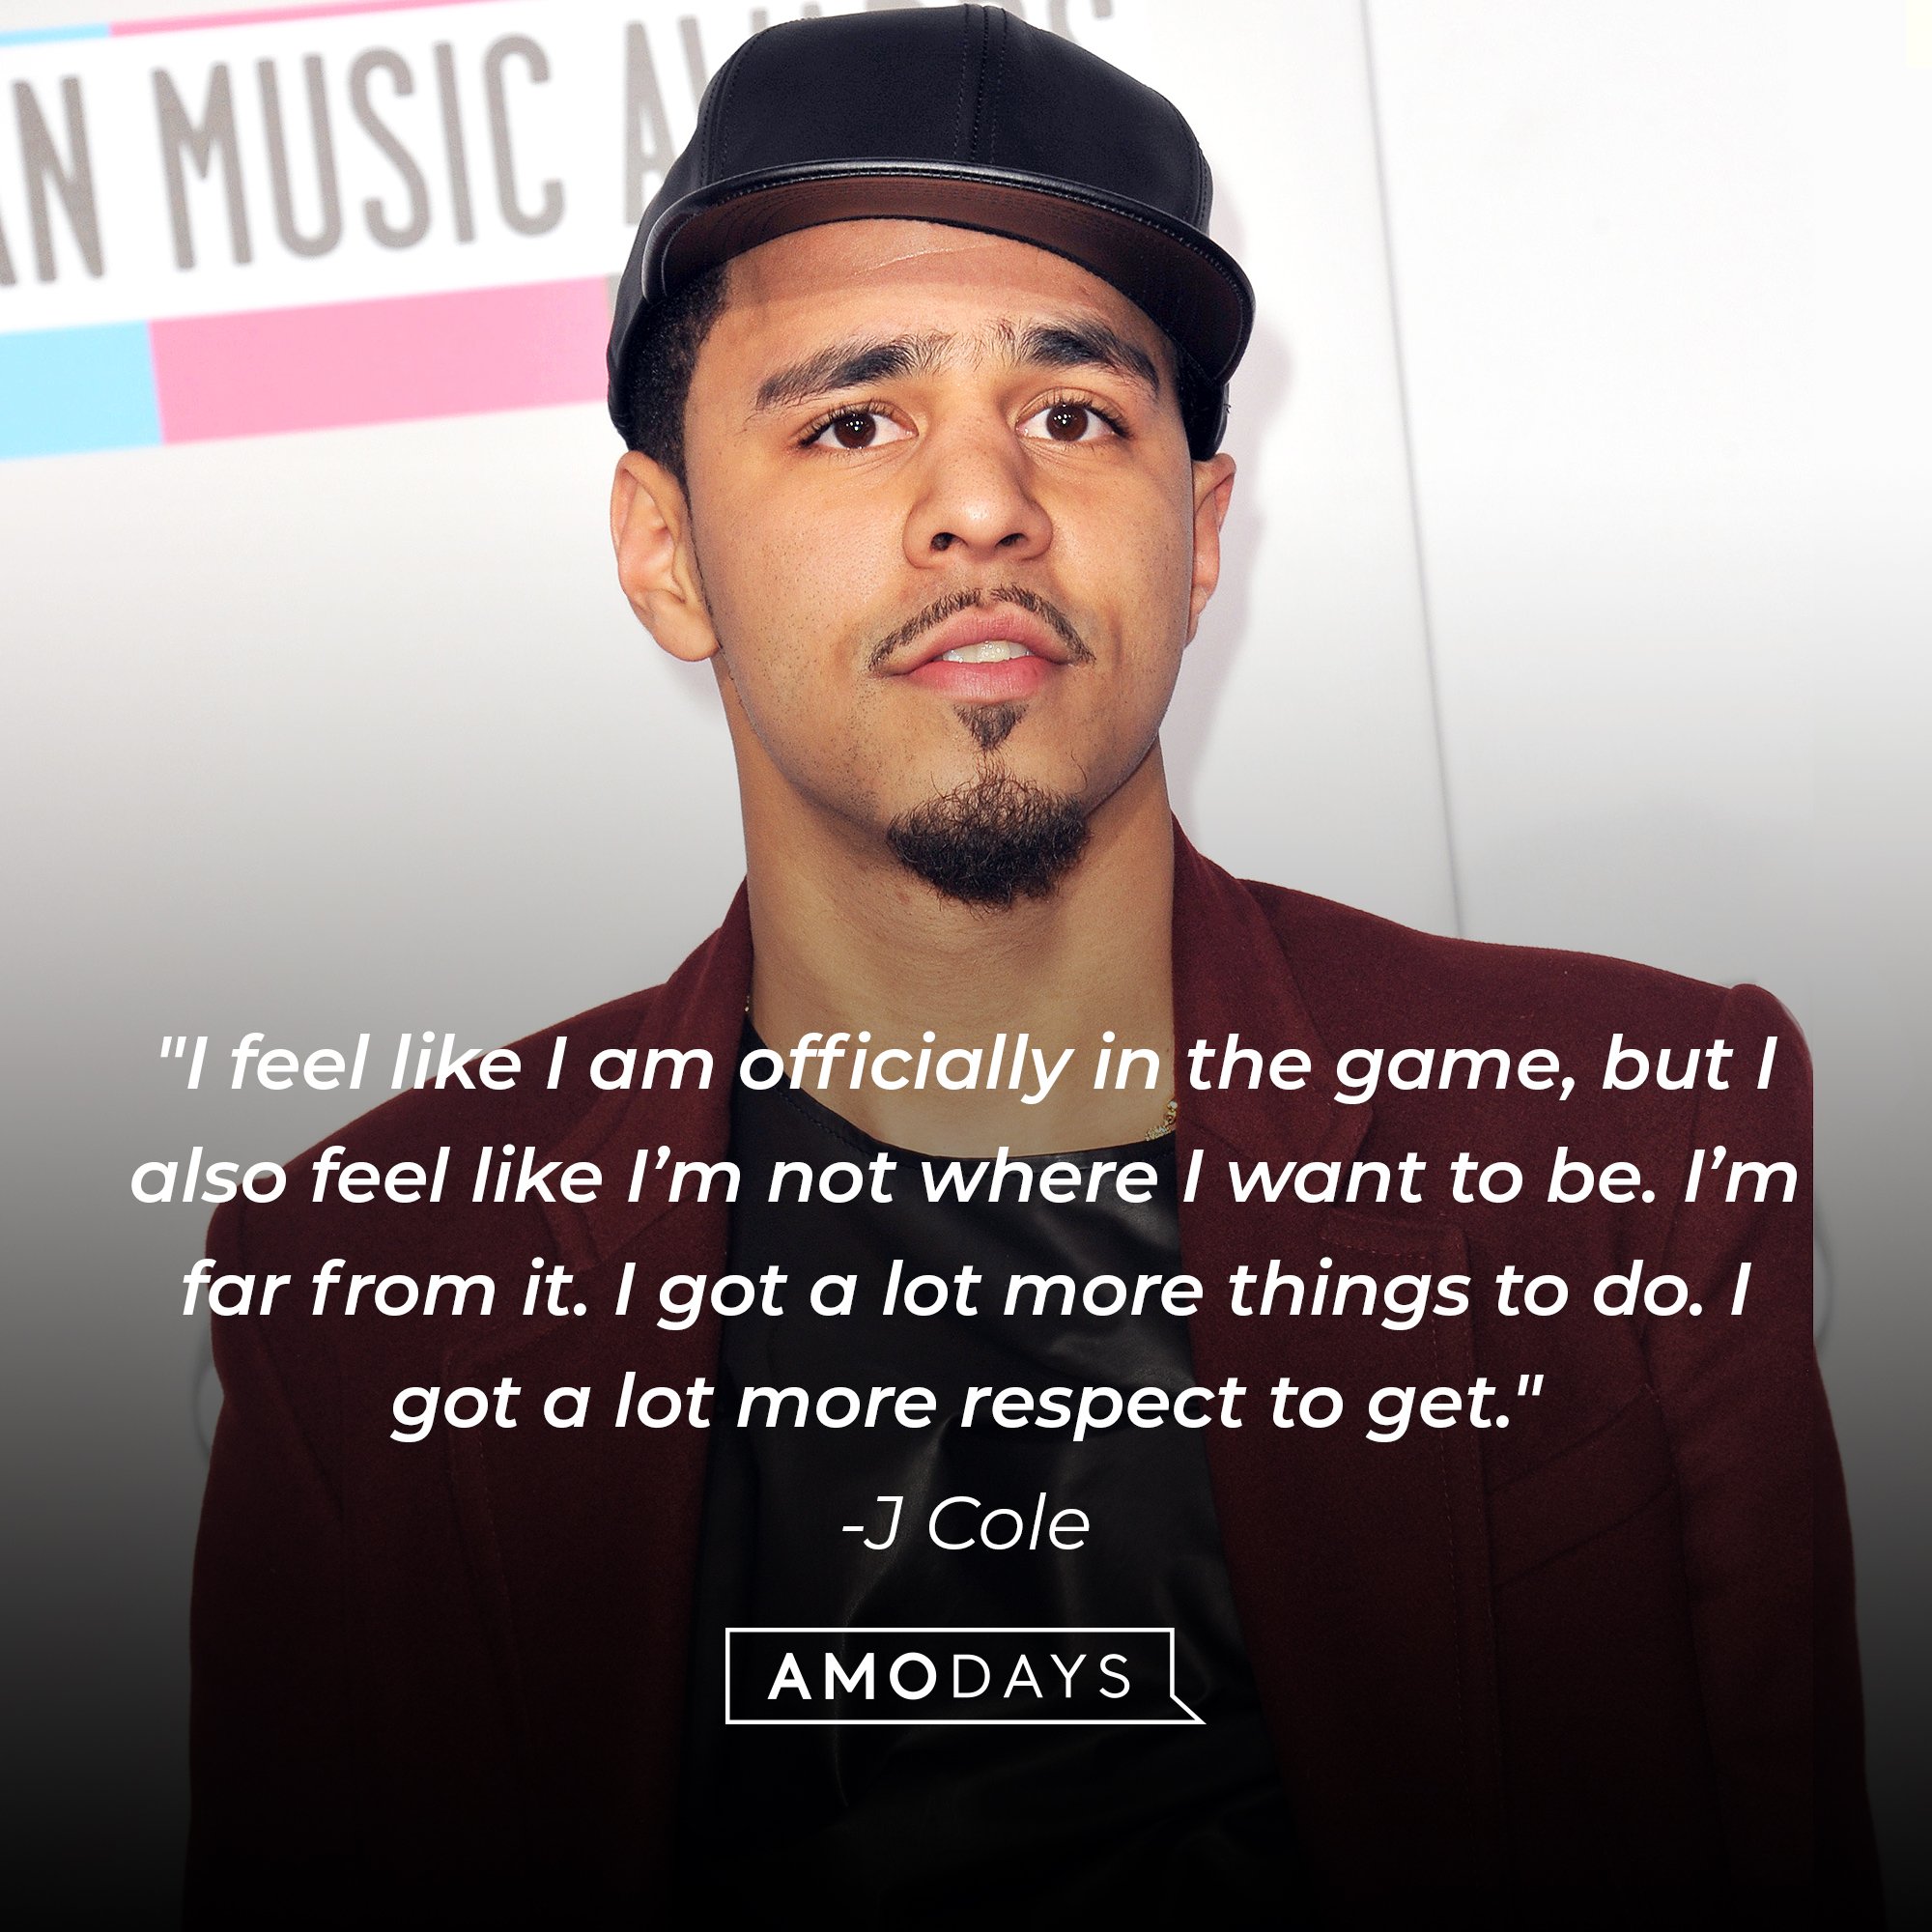 J Cole's quote: "I feel like I am officially in the game, but I also feel like I’m not where I want to be. I’m far from it. I got a lot more things to do. I got a lot more respect to get." | Image: AmoDays